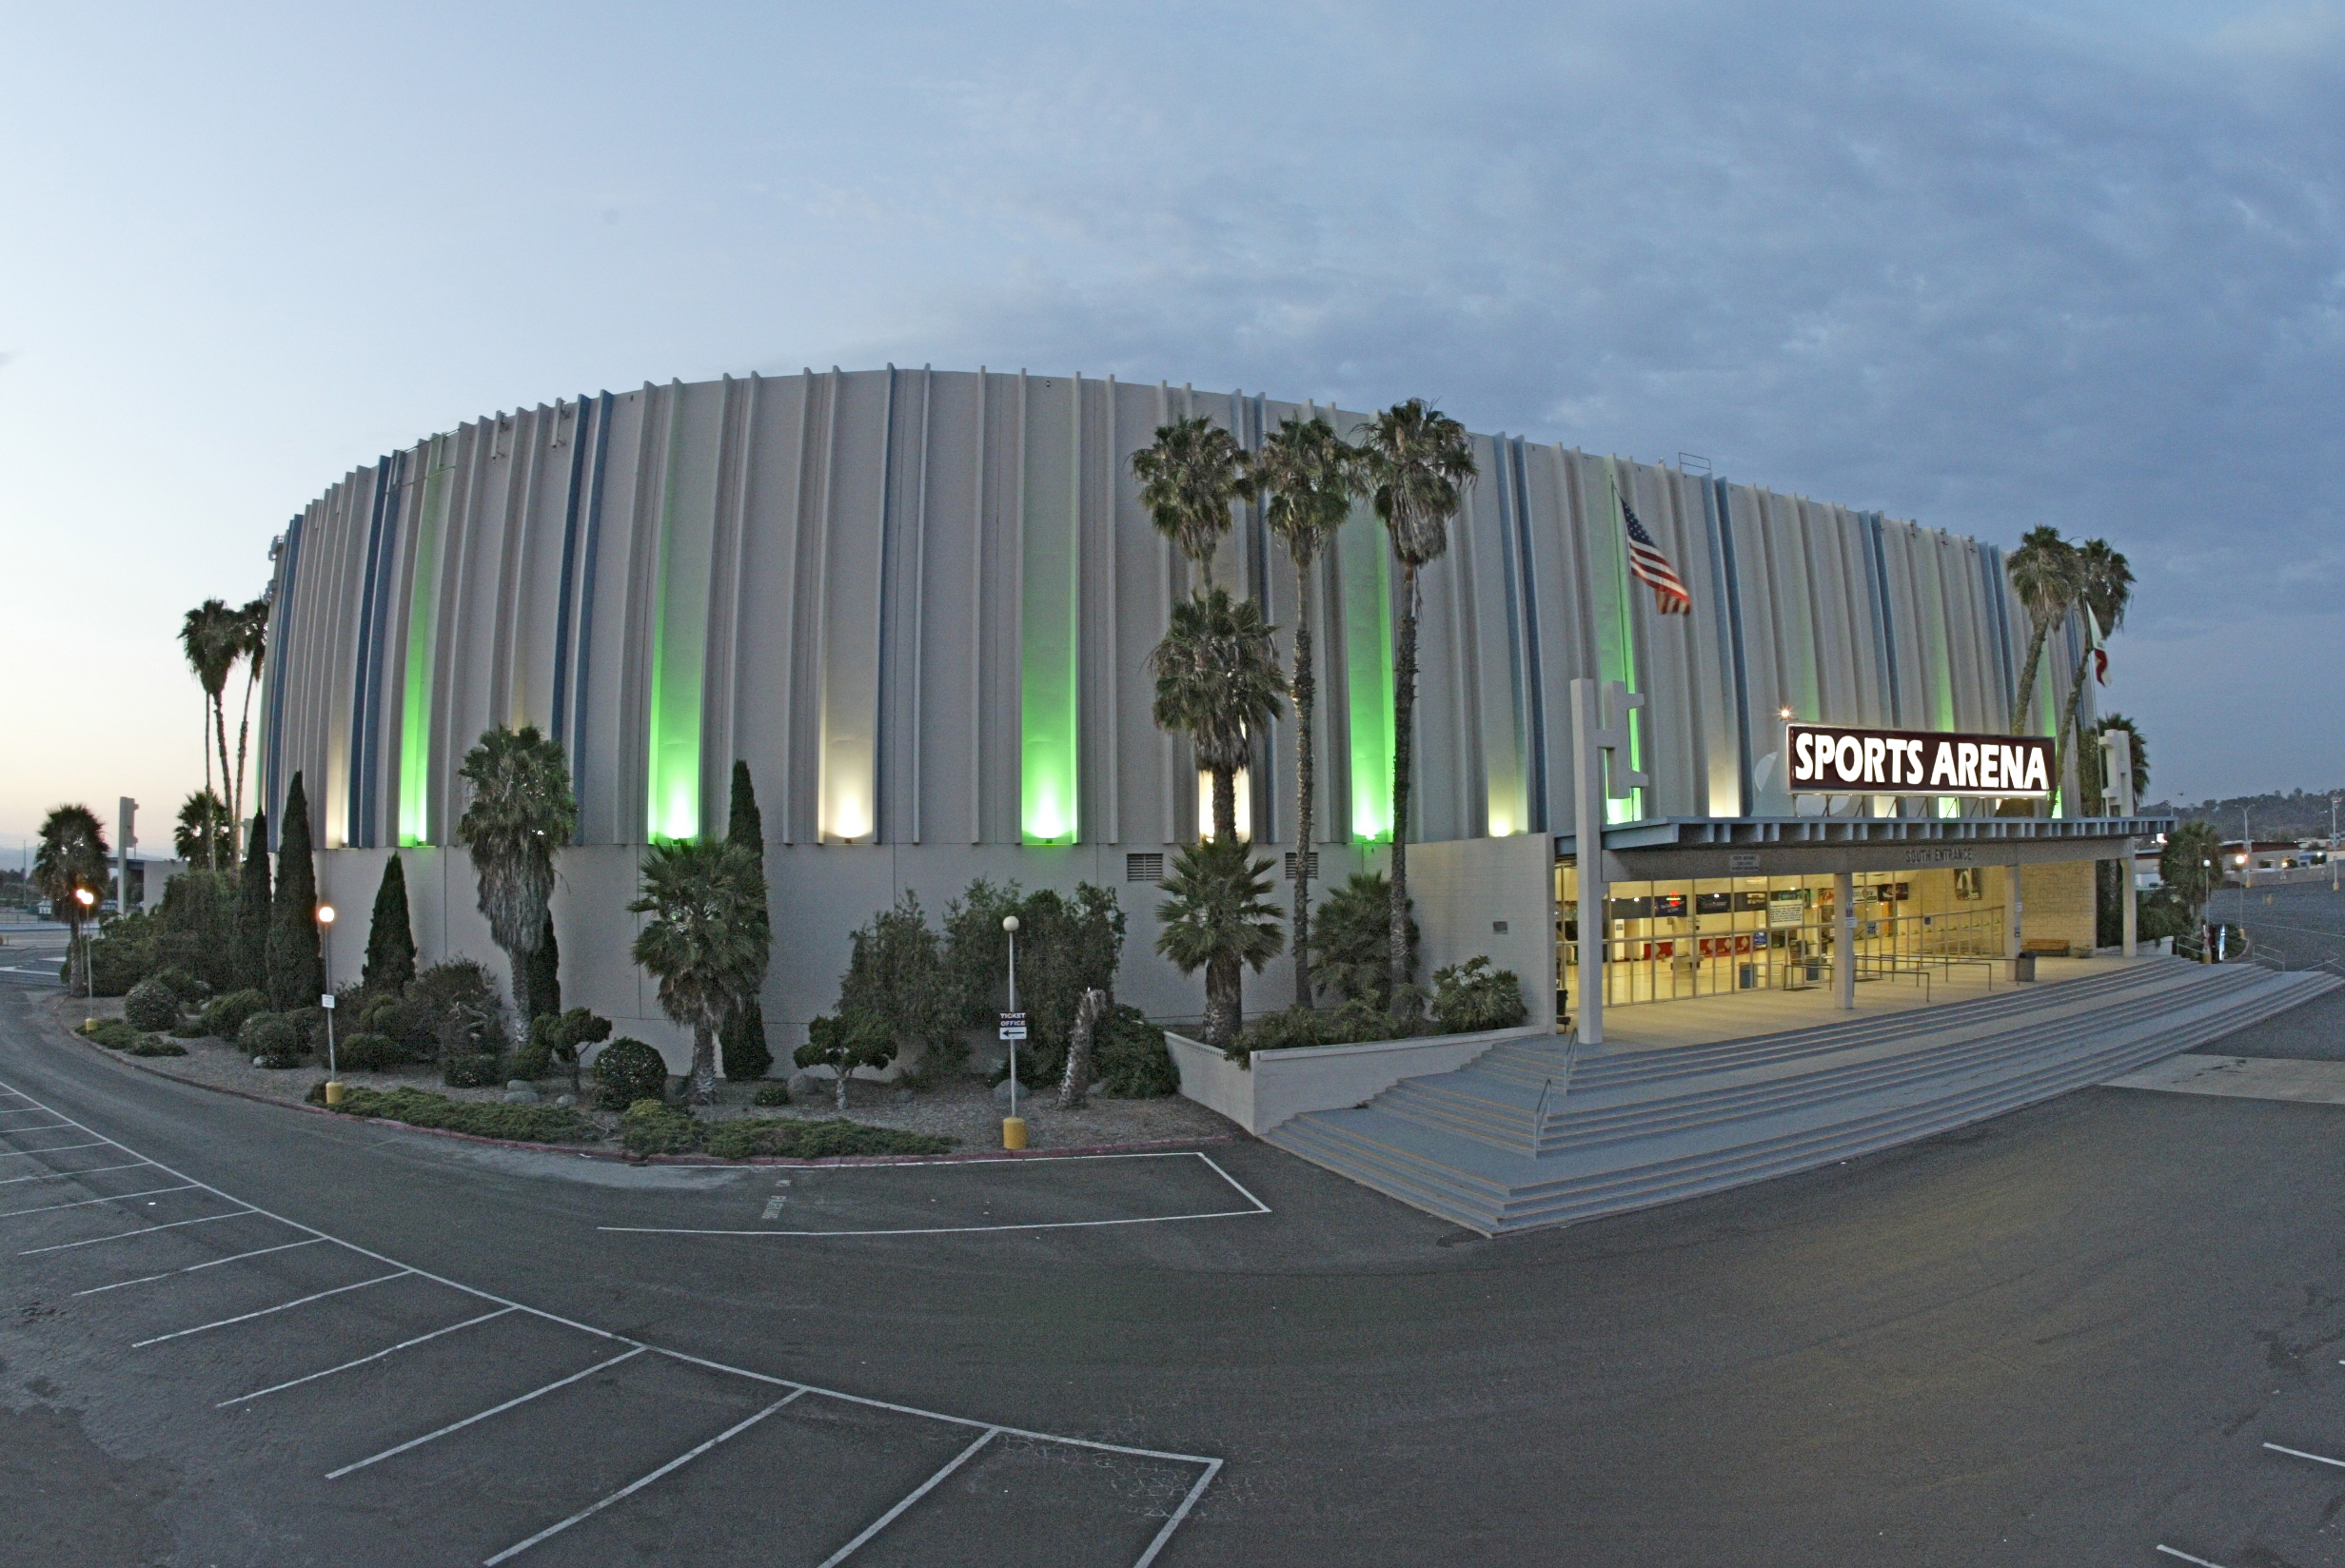 San diego sports arena, invest for long term